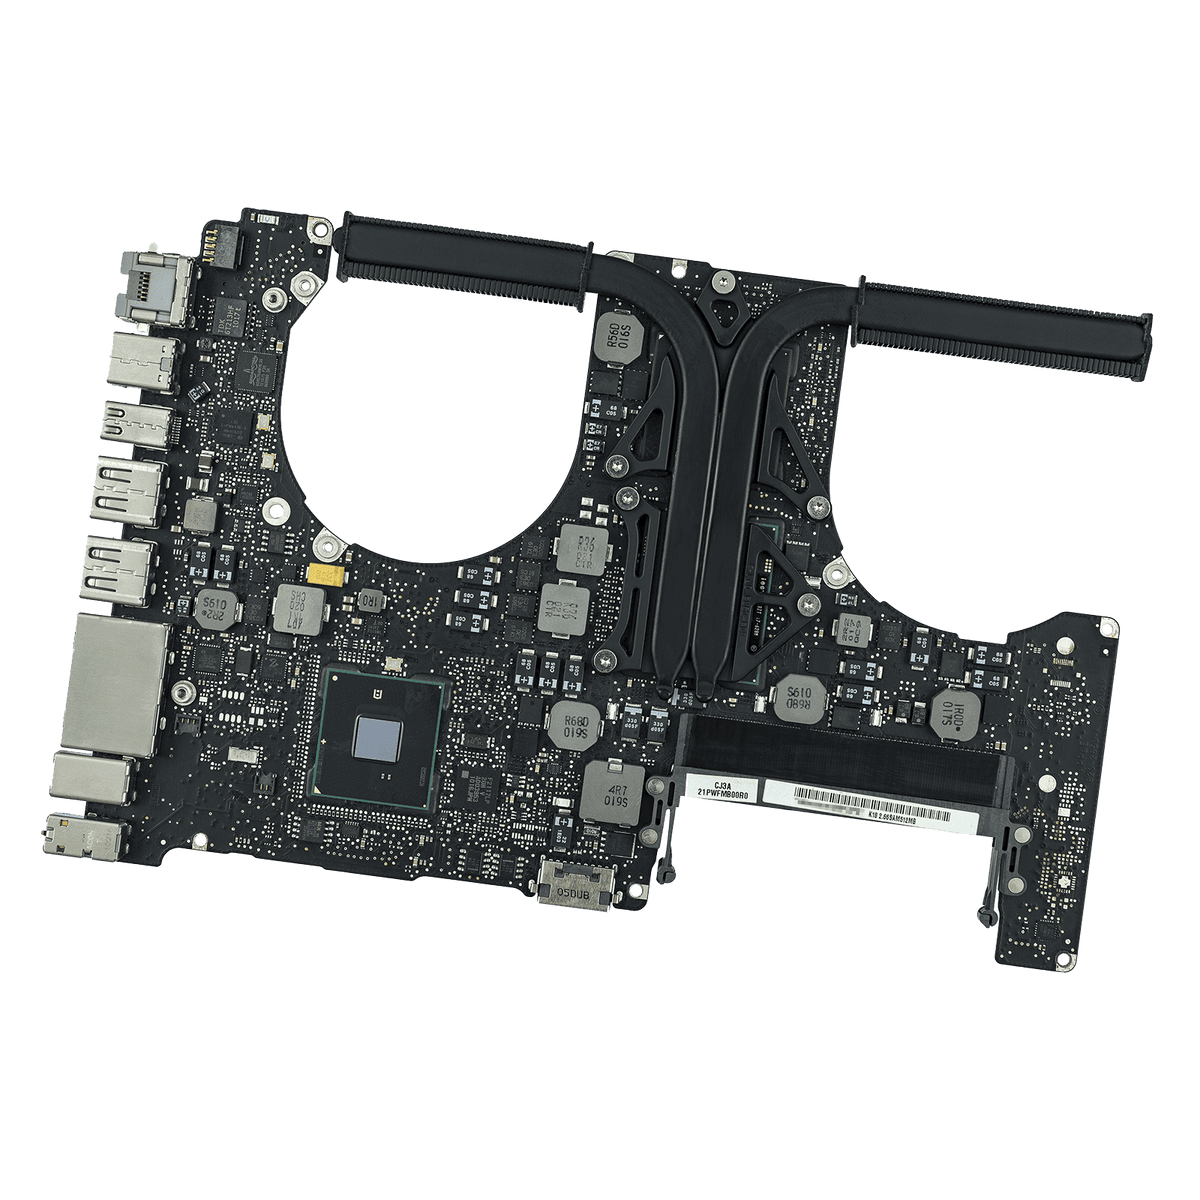 MOTHERBOARD FOR MACBOOK PRO 15" A1286 (MID 2010)